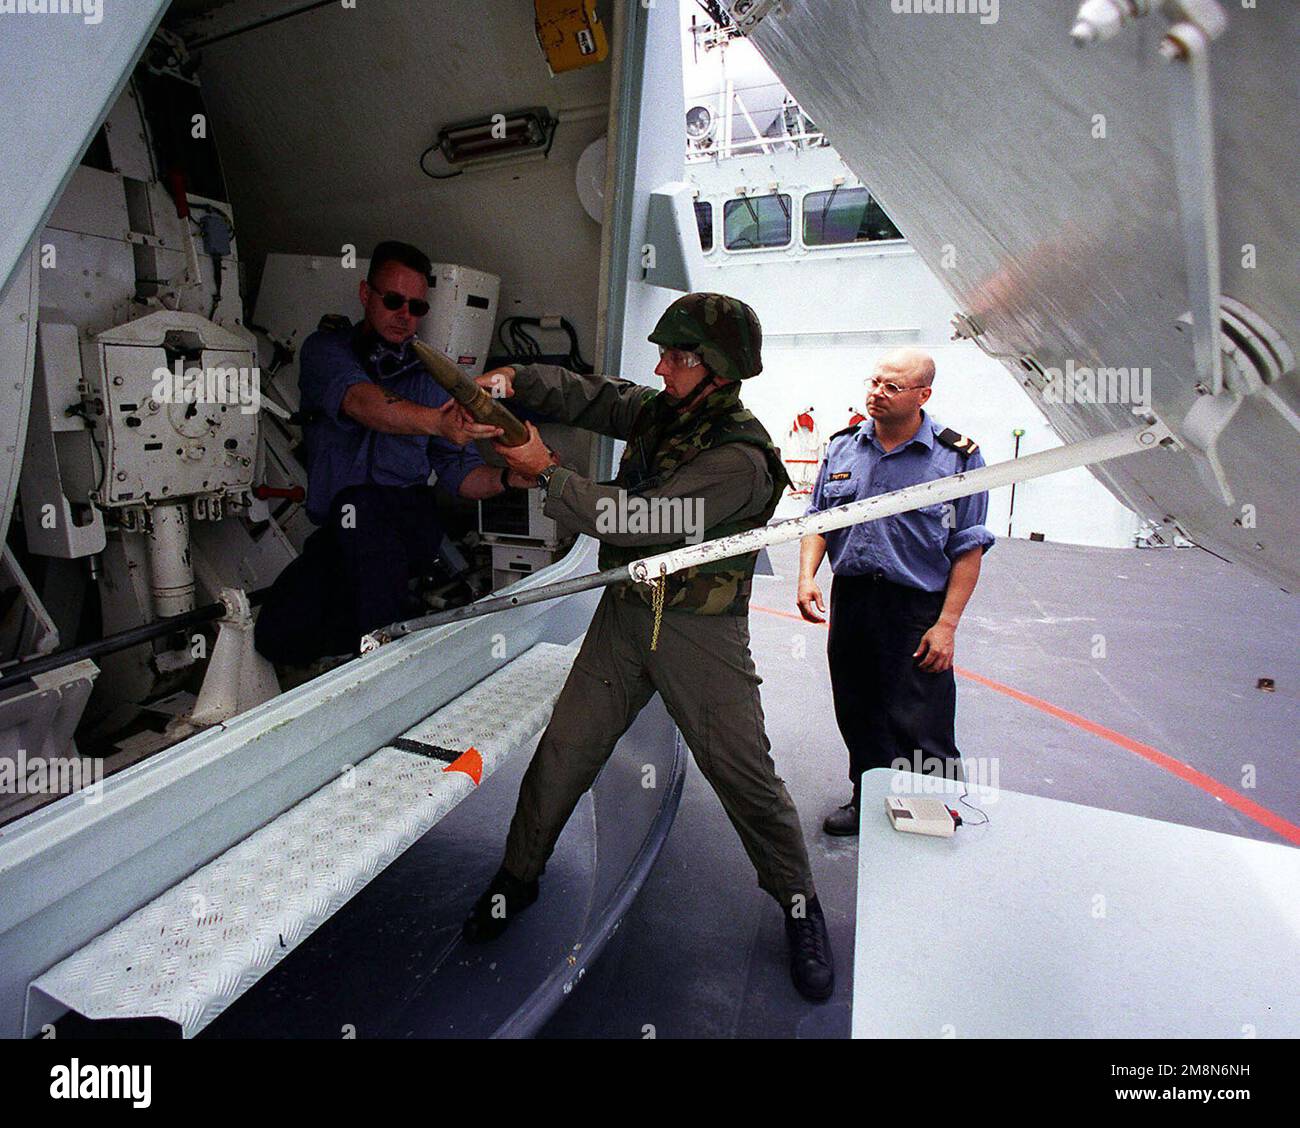 Leading SEAMAN Ken Sawyer (left), a weapons technician aboard the Canadian frigate HMCS REGINA, hands a shell from a jammed 57mm gun mount to PO1 Shelby Cornelius (center), Explosive Ordnance Disposal Mobile Unit Two from Whidbey Island, Washington, during the exercise RIMPAC 98. Another Canadian sailor looks on as the mount is unjammed. Leading Seaman Ken Sawyer (left), a weapons technician aboard the Canadian frigate HMCS REGINA, hands a shell from a jammed 57mm gun mount to PO1 Shelby Cornelius (center), Explosive Ordnance Disposal Mobile Unit Two from Whidbey Island, Washington, during the Stock Photo